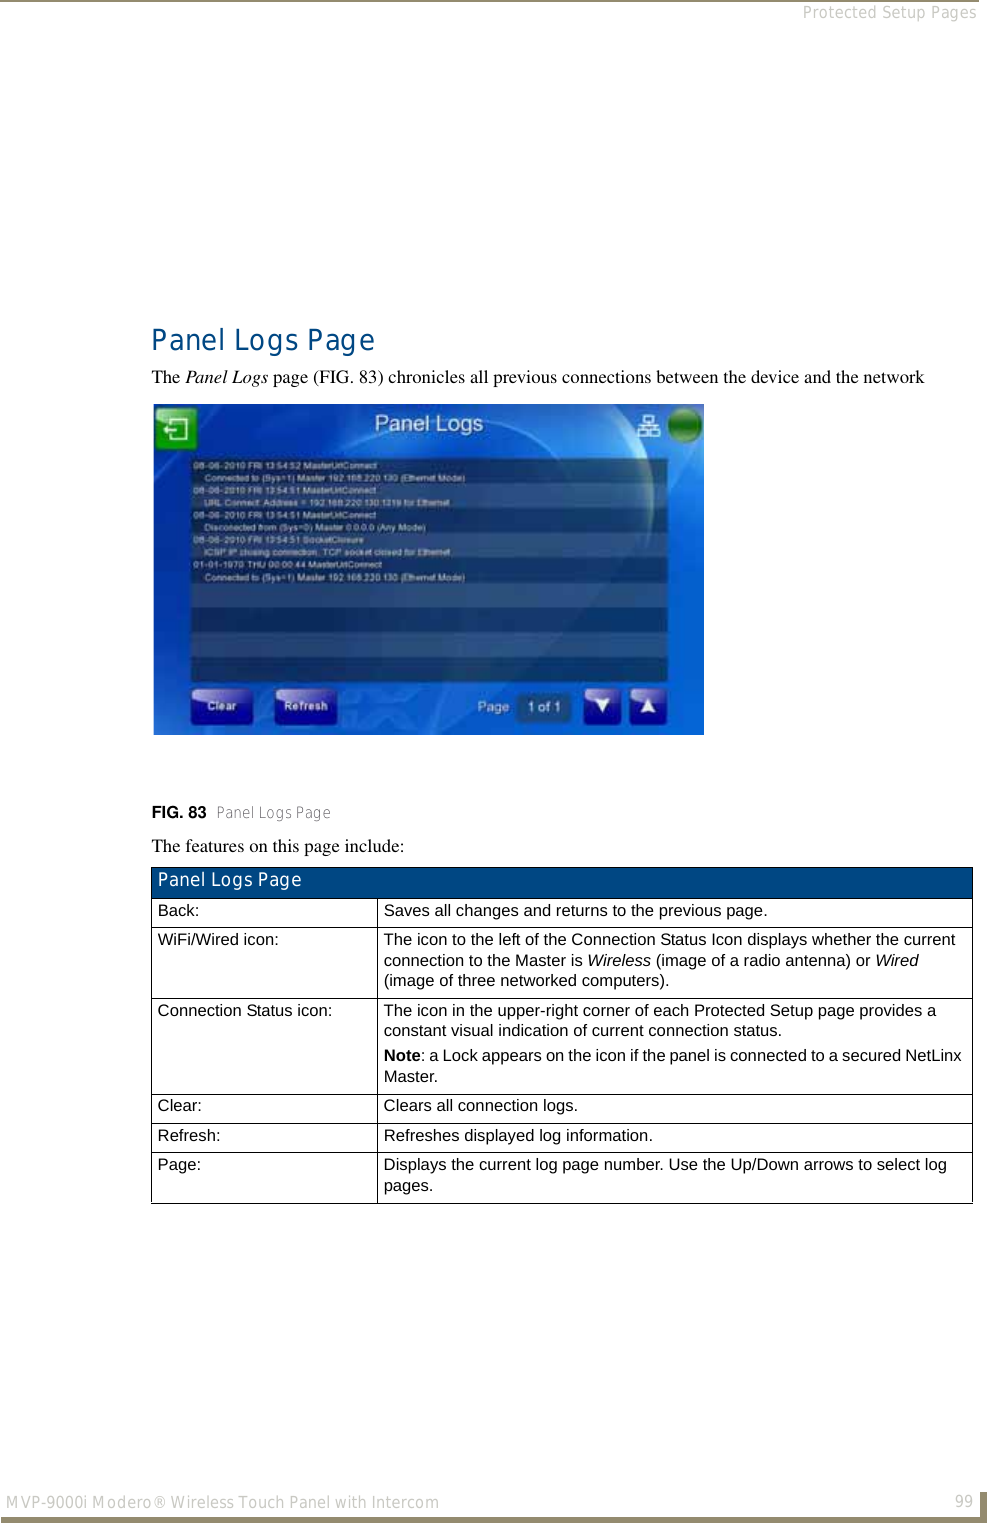 Protected Setup Pages99MVP-9000i Modero® Wireless Touch Panel with IntercomPanel Logs PageThe Panel Logs page (FIG. 83) chronicles all previous connections between the device and the networkThe features on this page include:FIG. 83  Panel Logs PagePanel Logs Page Back: Saves all changes and returns to the previous page.WiFi/Wired icon: The icon to the left of the Connection Status Icon displays whether the current connection to the Master is Wireless (image of a radio antenna) or Wired (image of three networked computers).Connection Status icon: The icon in the upper-right corner of each Protected Setup page provides a constant visual indication of current connection status.Note: a Lock appears on the icon if the panel is connected to a secured NetLinx Master.Clear: Clears all connection logs.Refresh: Refreshes displayed log information.Page: Displays the current log page number. Use the Up/Down arrows to select log pages.